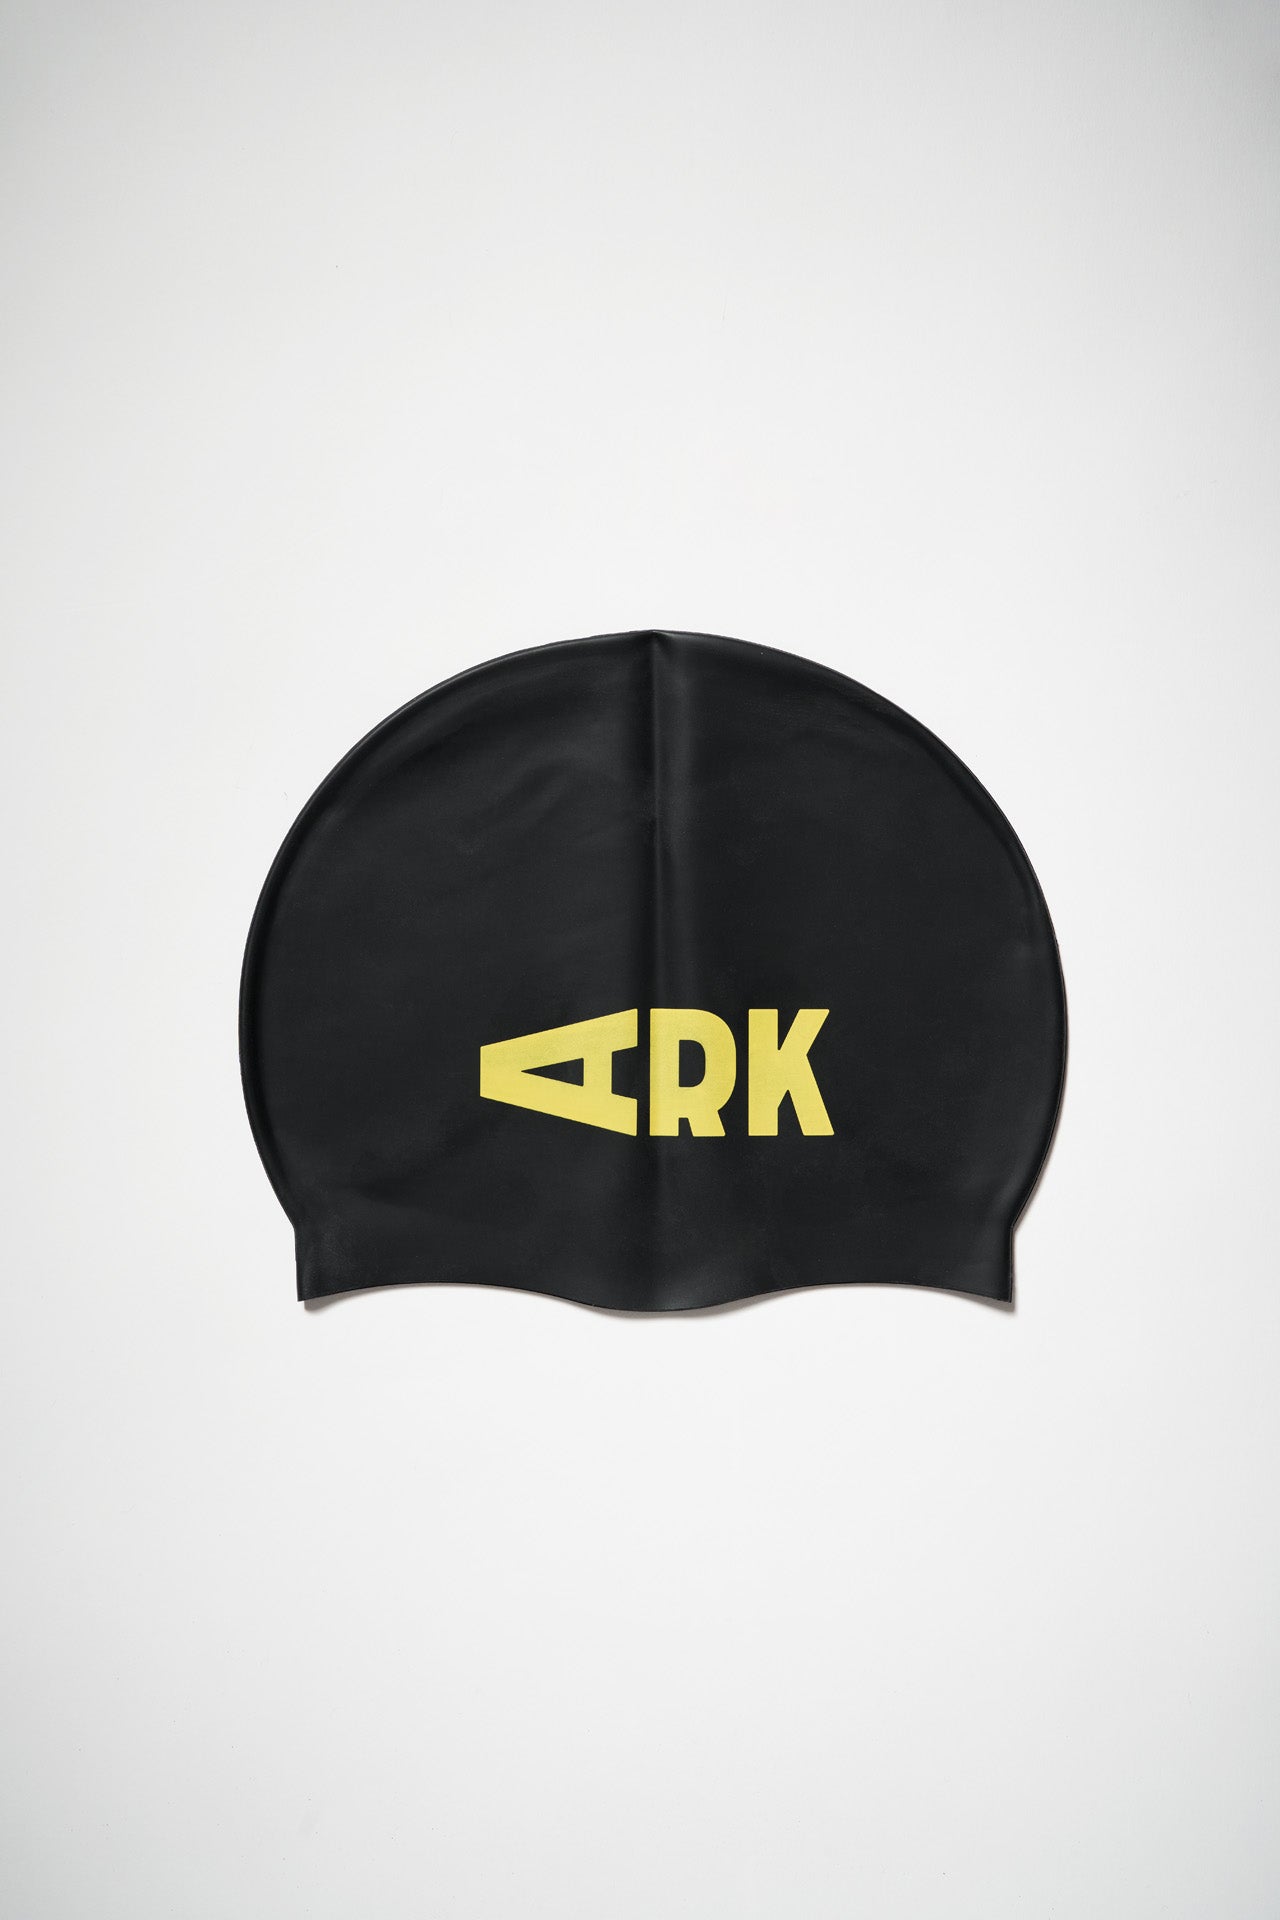 Product photo of ARK Tunny™ Black/Yellow